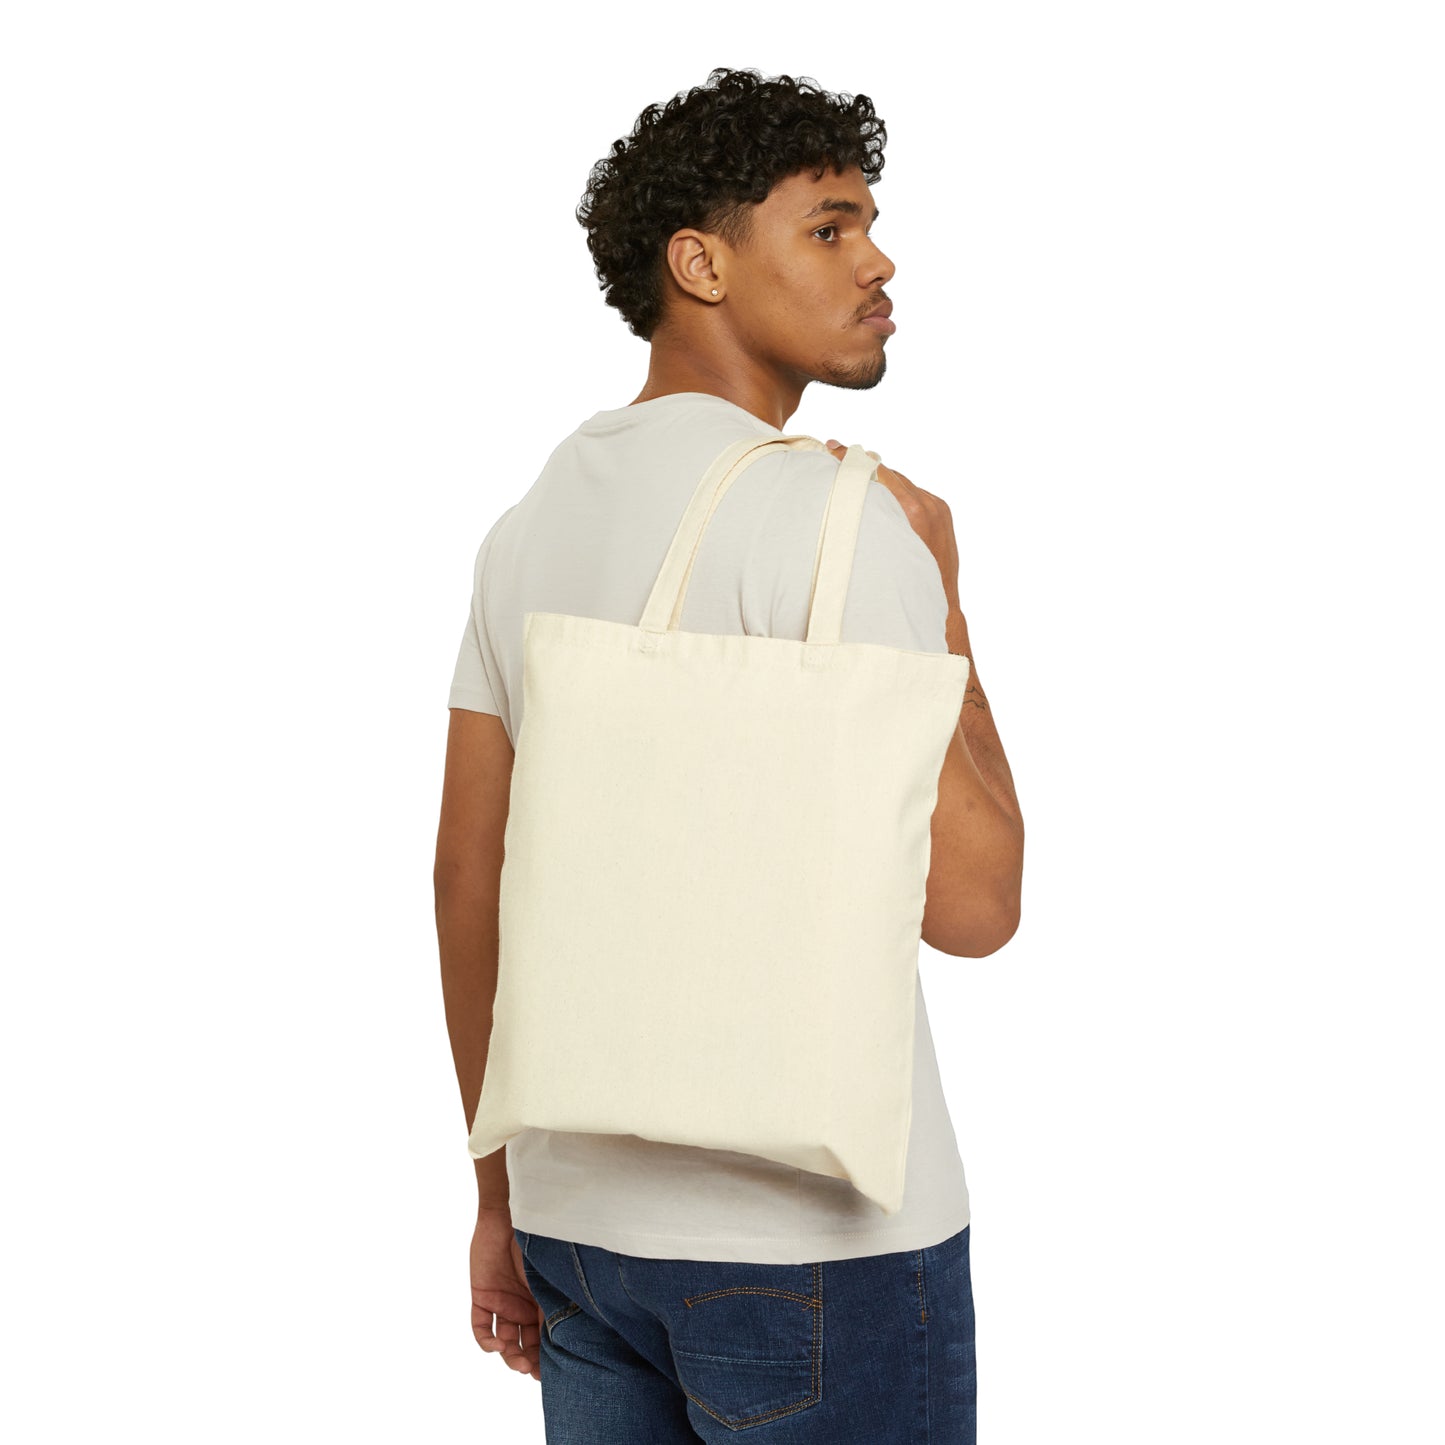 "Quilter" Cotton Canvas Tote Bag